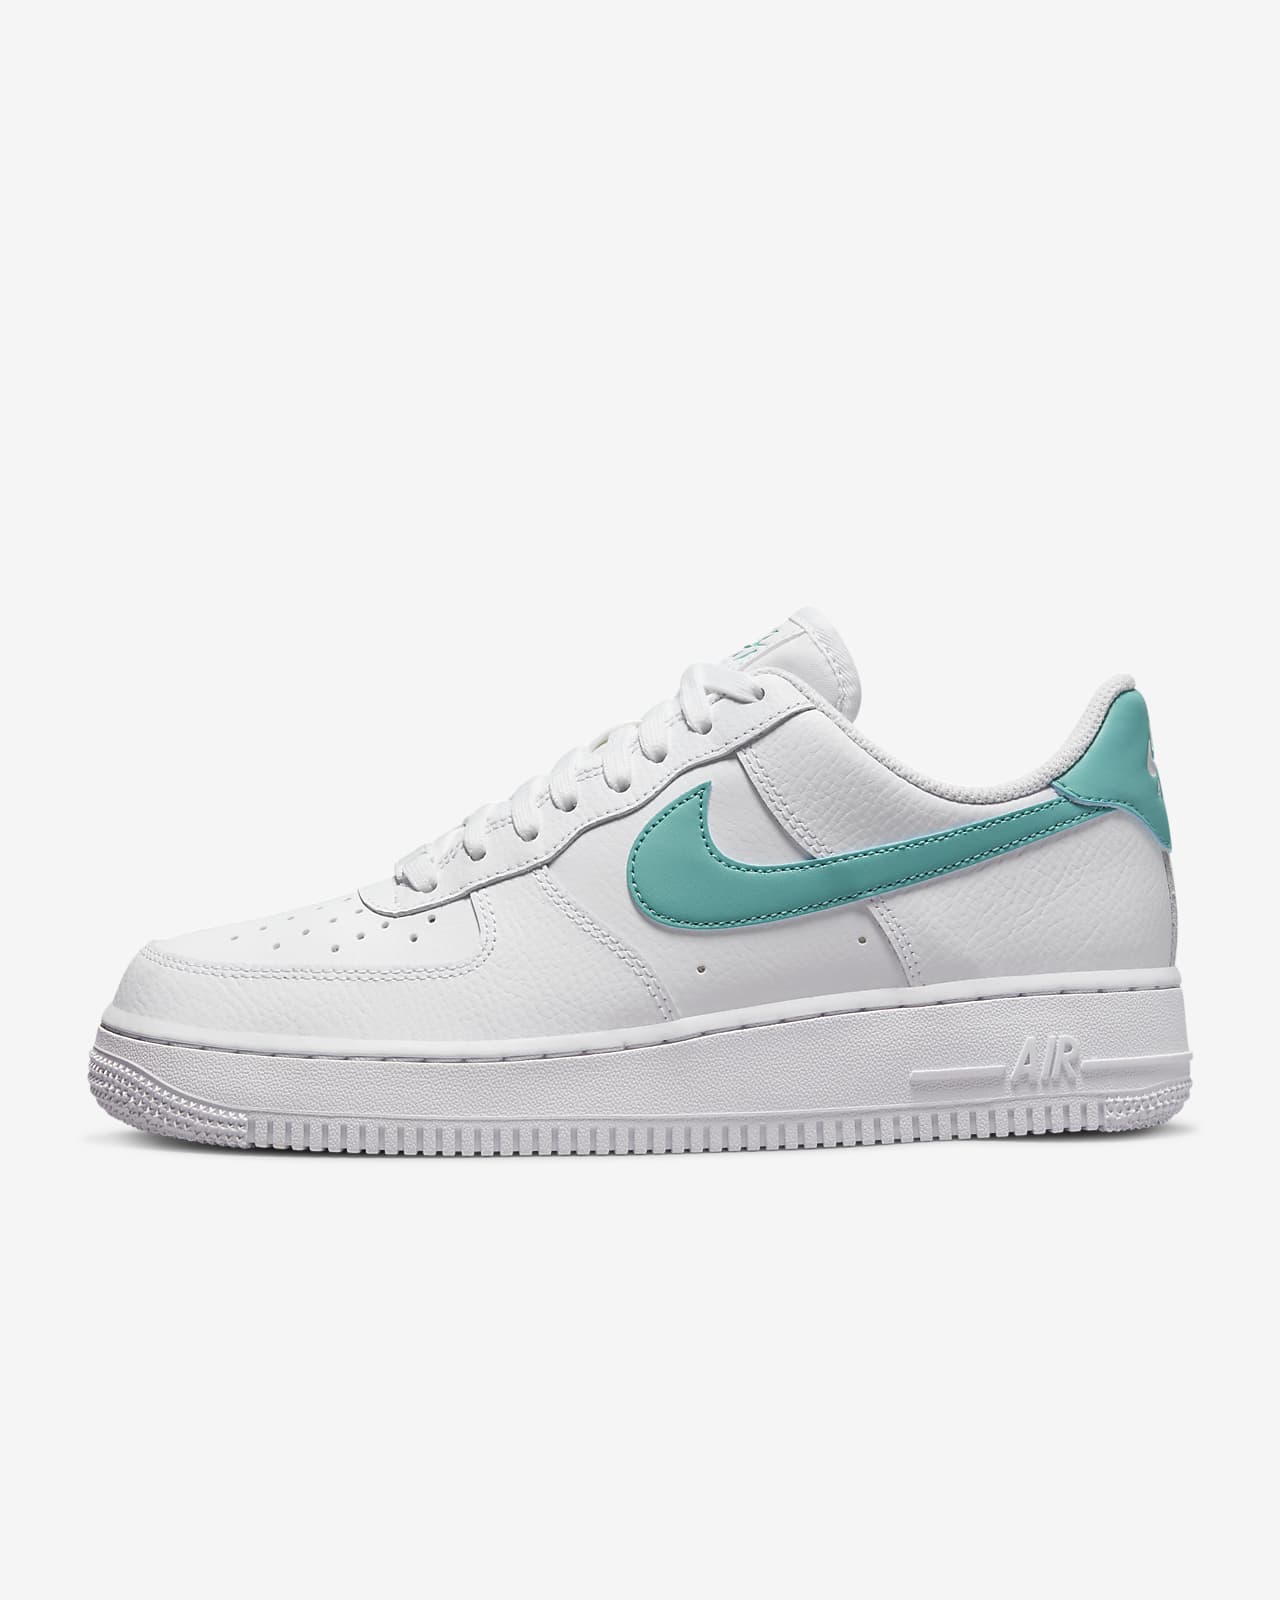 Women’s Nike Air Force 1 ’07 ‘Washed Teal’